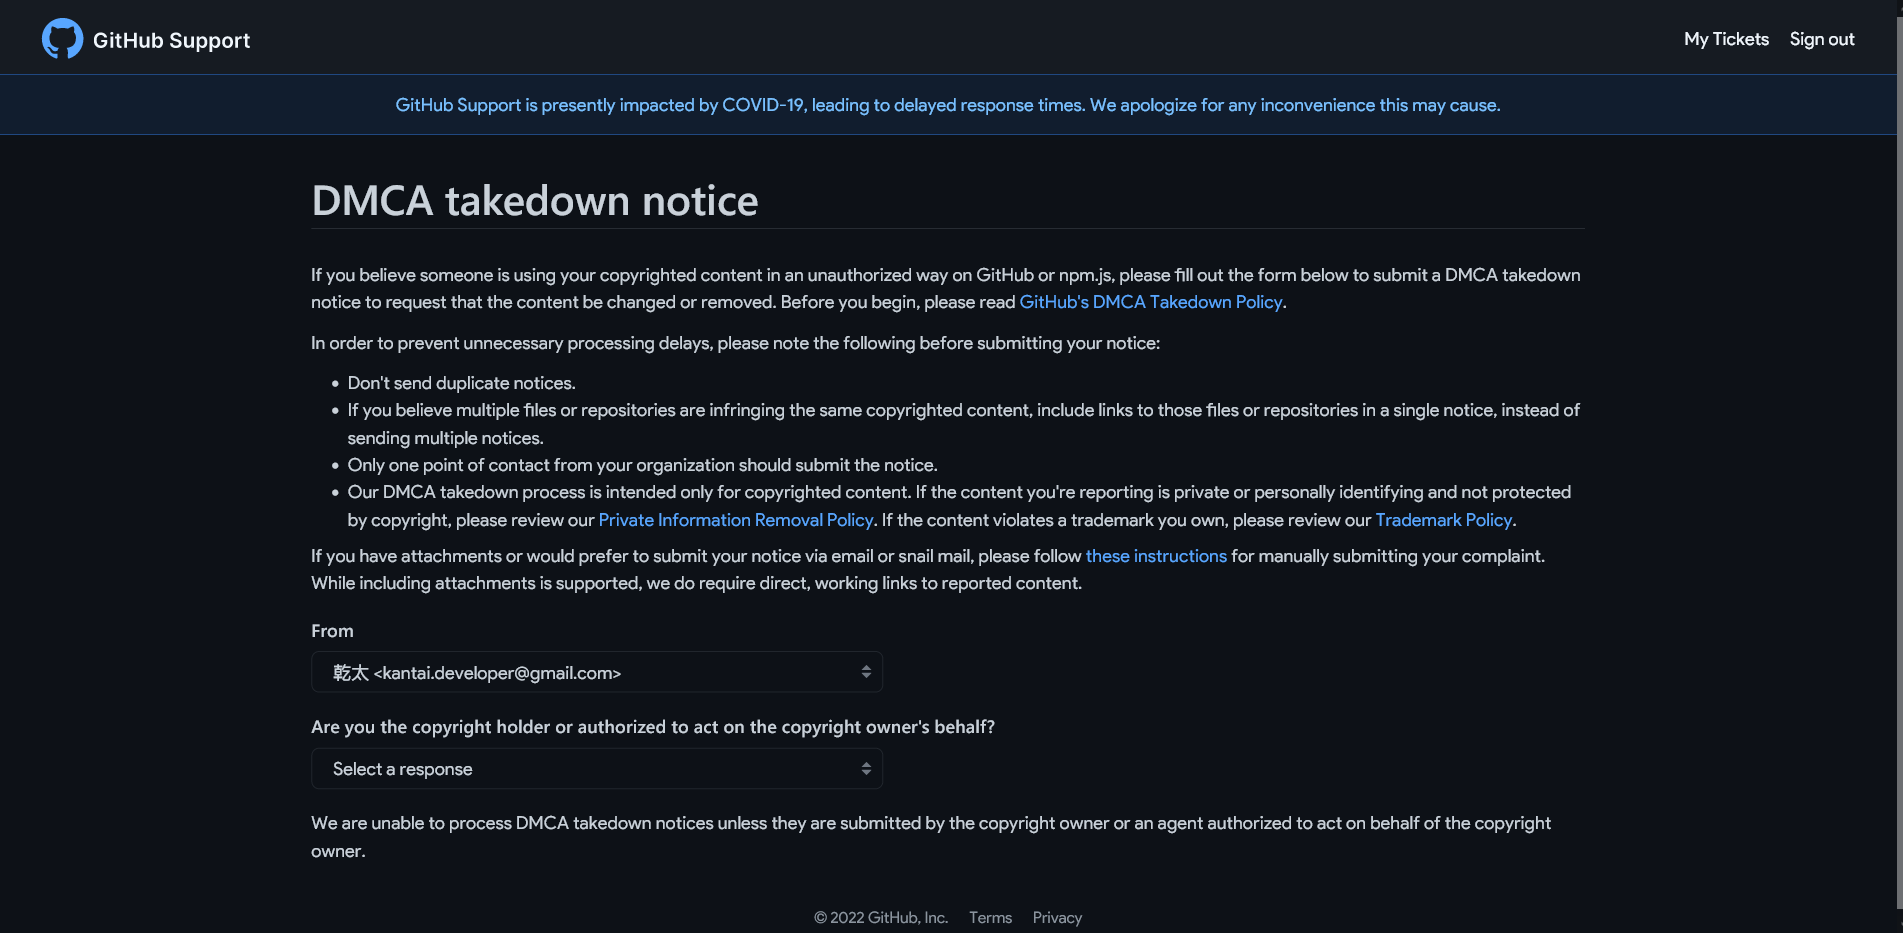 Submit a DMCA takedown notice